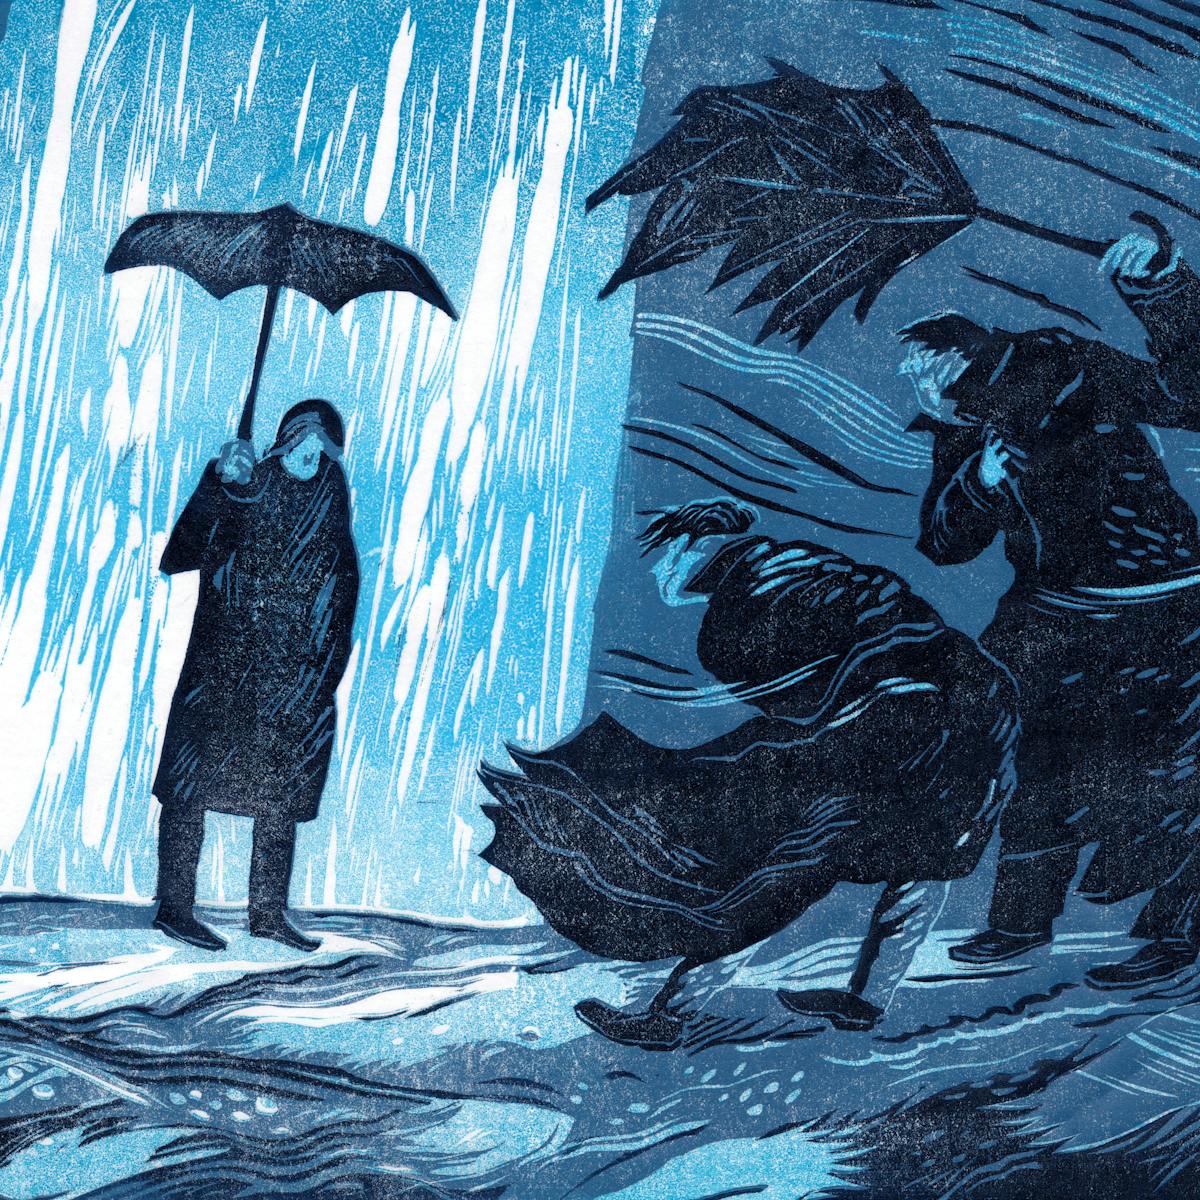 Digital copy of an original linocut artwork. The artwork shows four figures, all wearing long black coats and whose faces are obscured. Three of the figures appear to be struggling against a strong blustering wind, bent over to shield themselves. The wind is represented by blue and white curved brushstrokes in in the background. The fourth central figure, unlike the other three, stands beneath a strong rain shower, represented by thick white vertical brushstrokes. They are holding a black umbrella, and are slouched over and looking towards the ground. They appear withdrawn and resigned to the rain's force. 